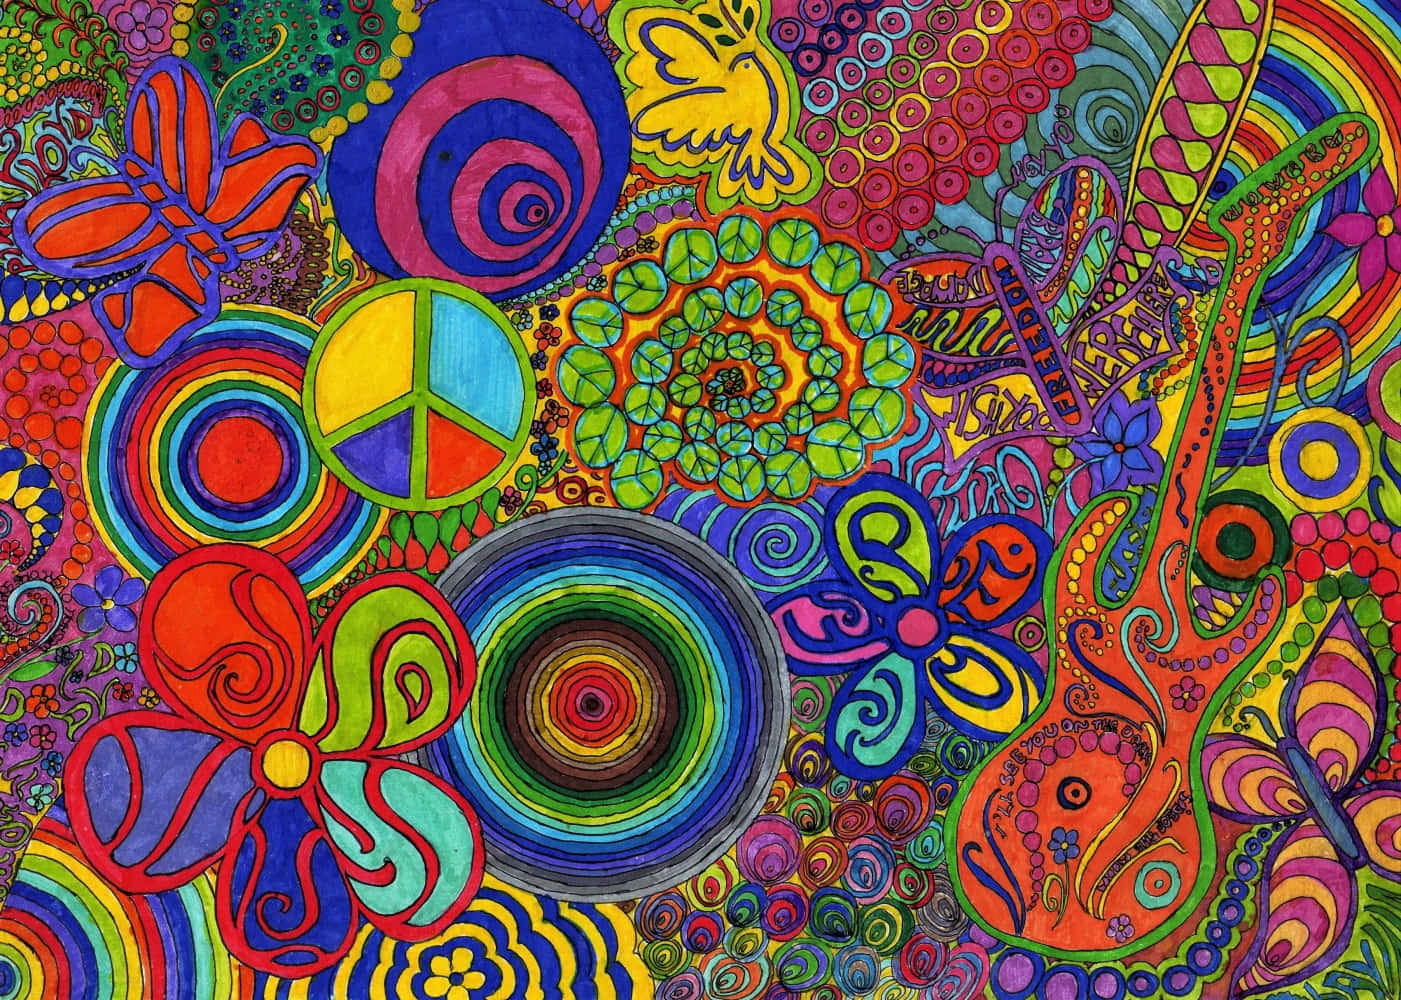 Download “Experience Your Wildest Dreams with Psychedelic” | Wallpapers.com